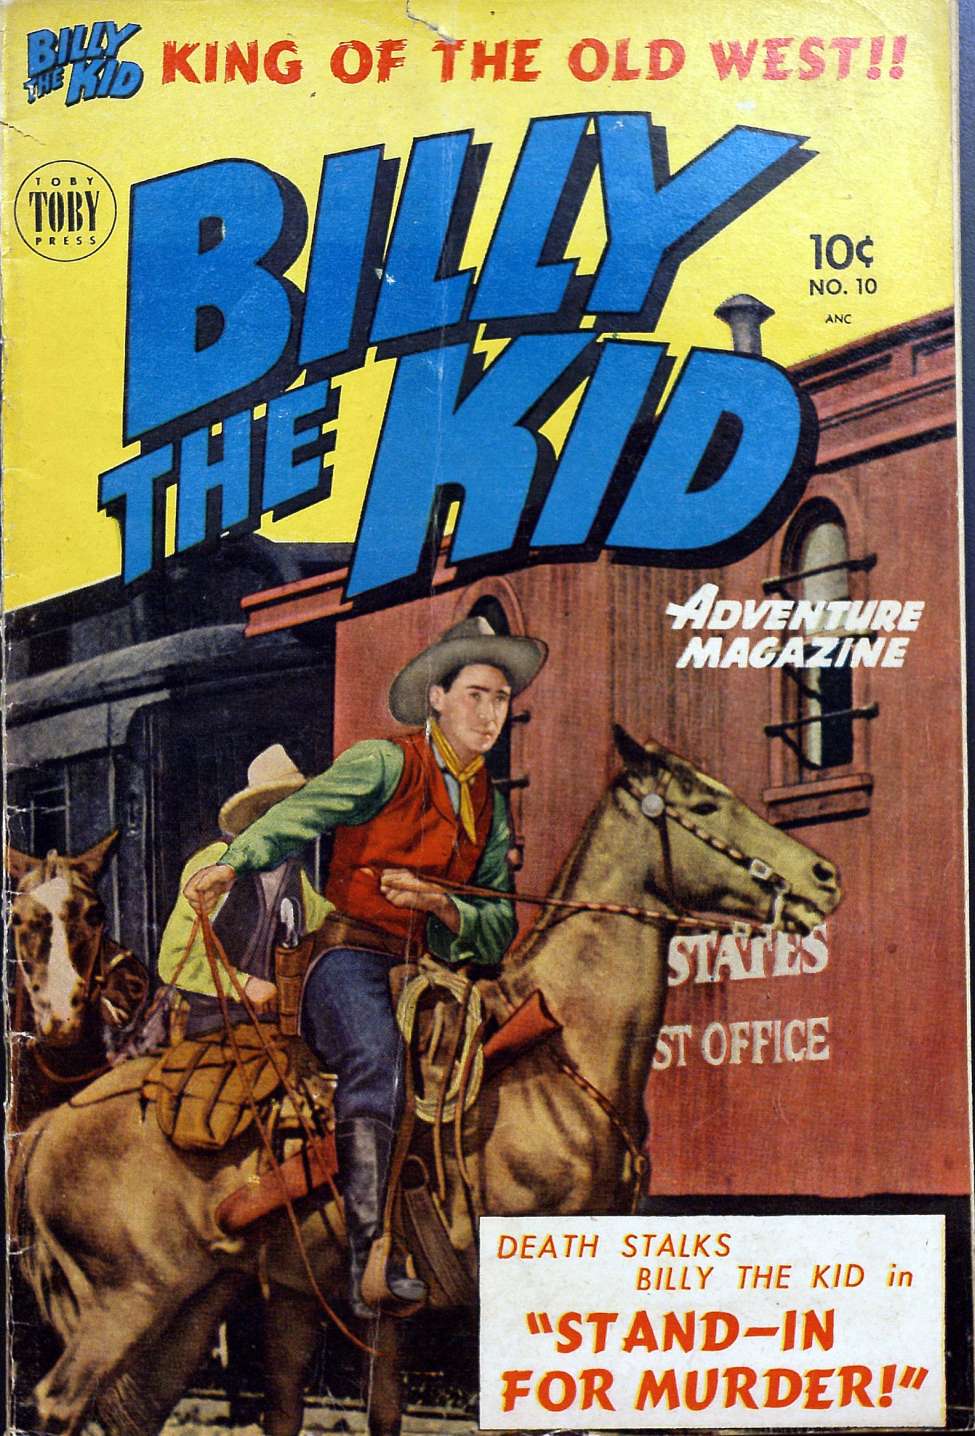 Book Cover For Billy the Kid Adventure Magazine 10